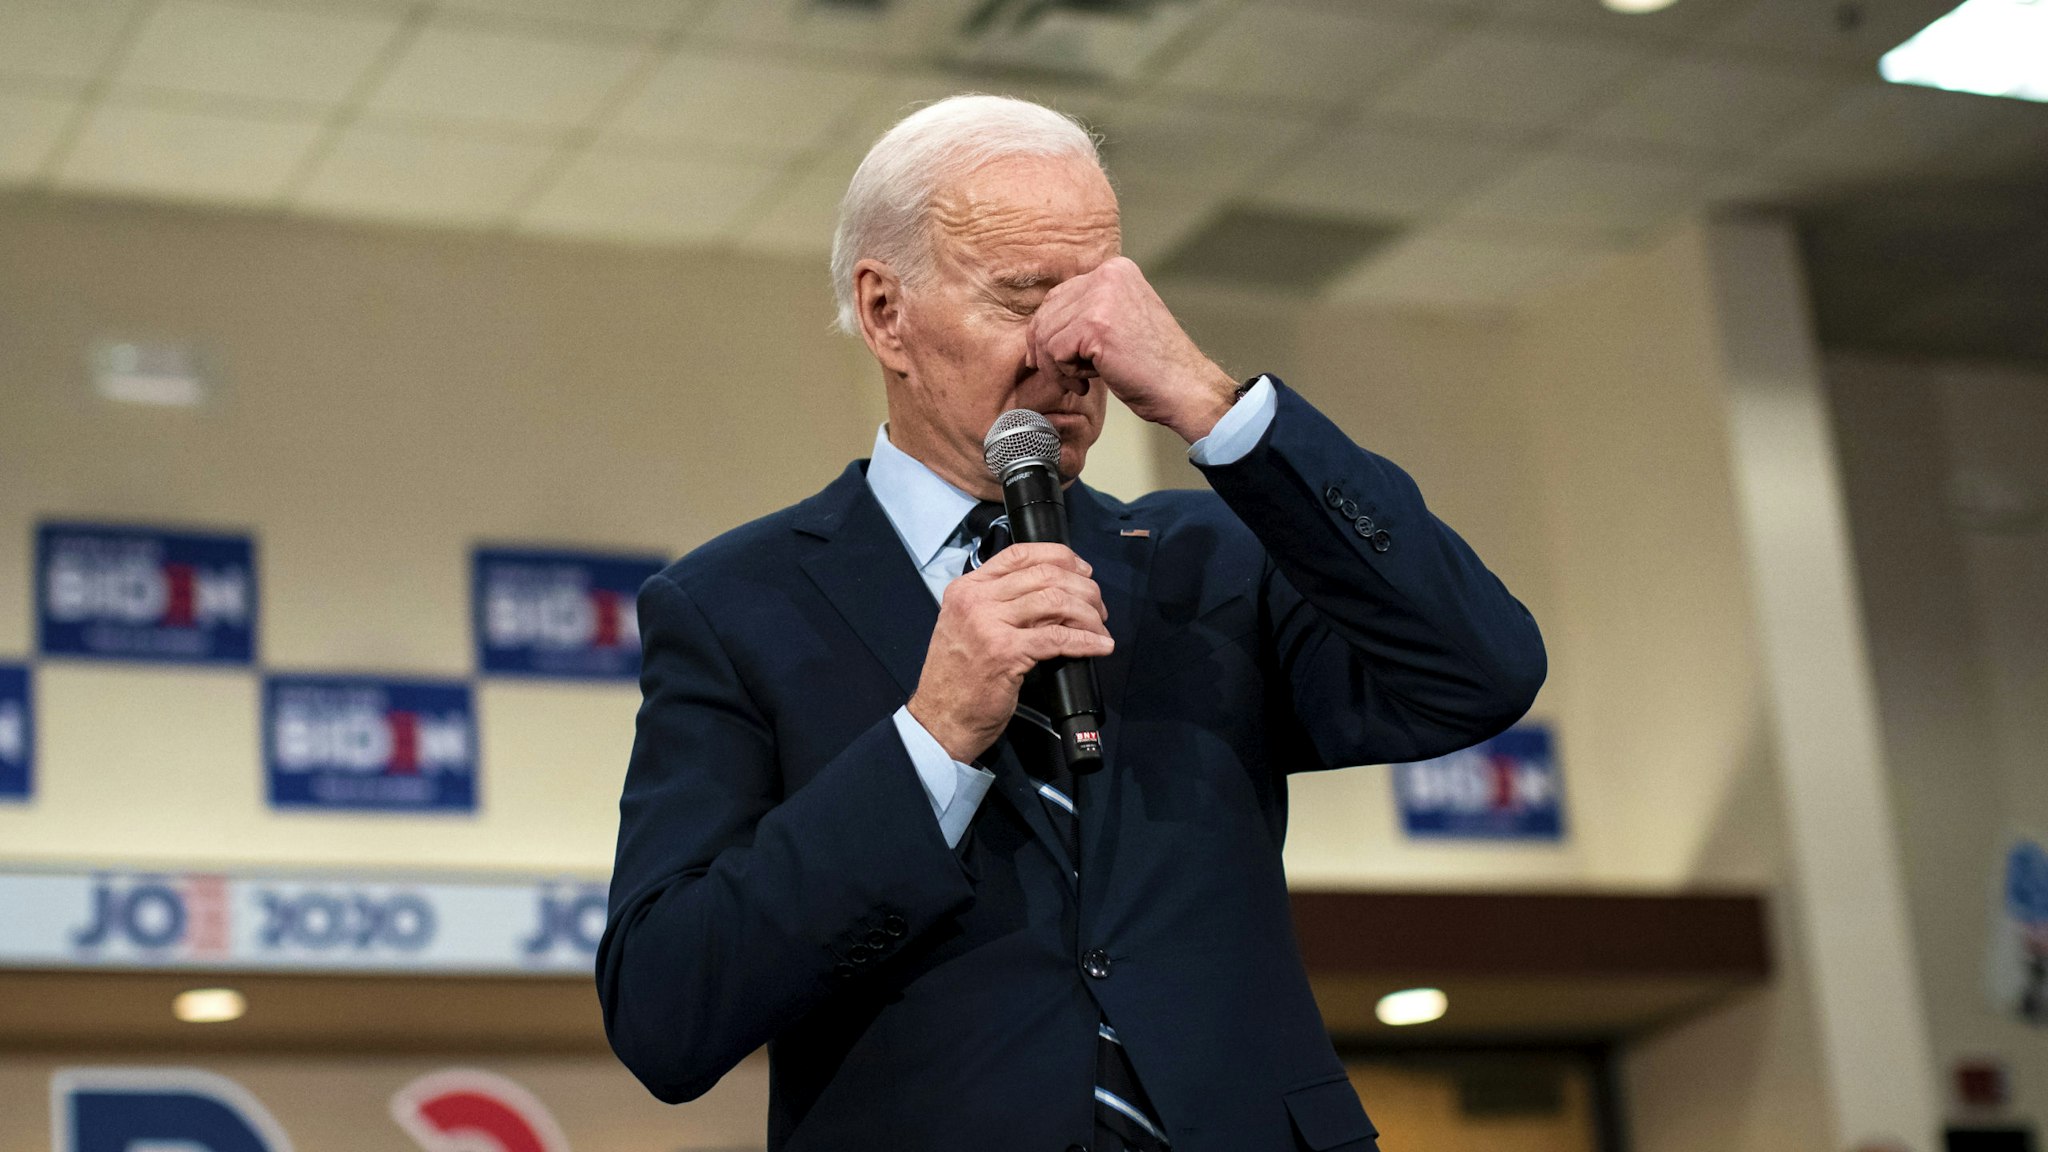 AMES, IA - JANUARY 21: Democratic presidential candidate, former Vice President Joe Biden speaks during an event on January 21, 2020 in Ames, Iowa. With less than two weeks to go until the Iowa caucus, the candidates are making their case to voters in the state of the first 2020 primary.